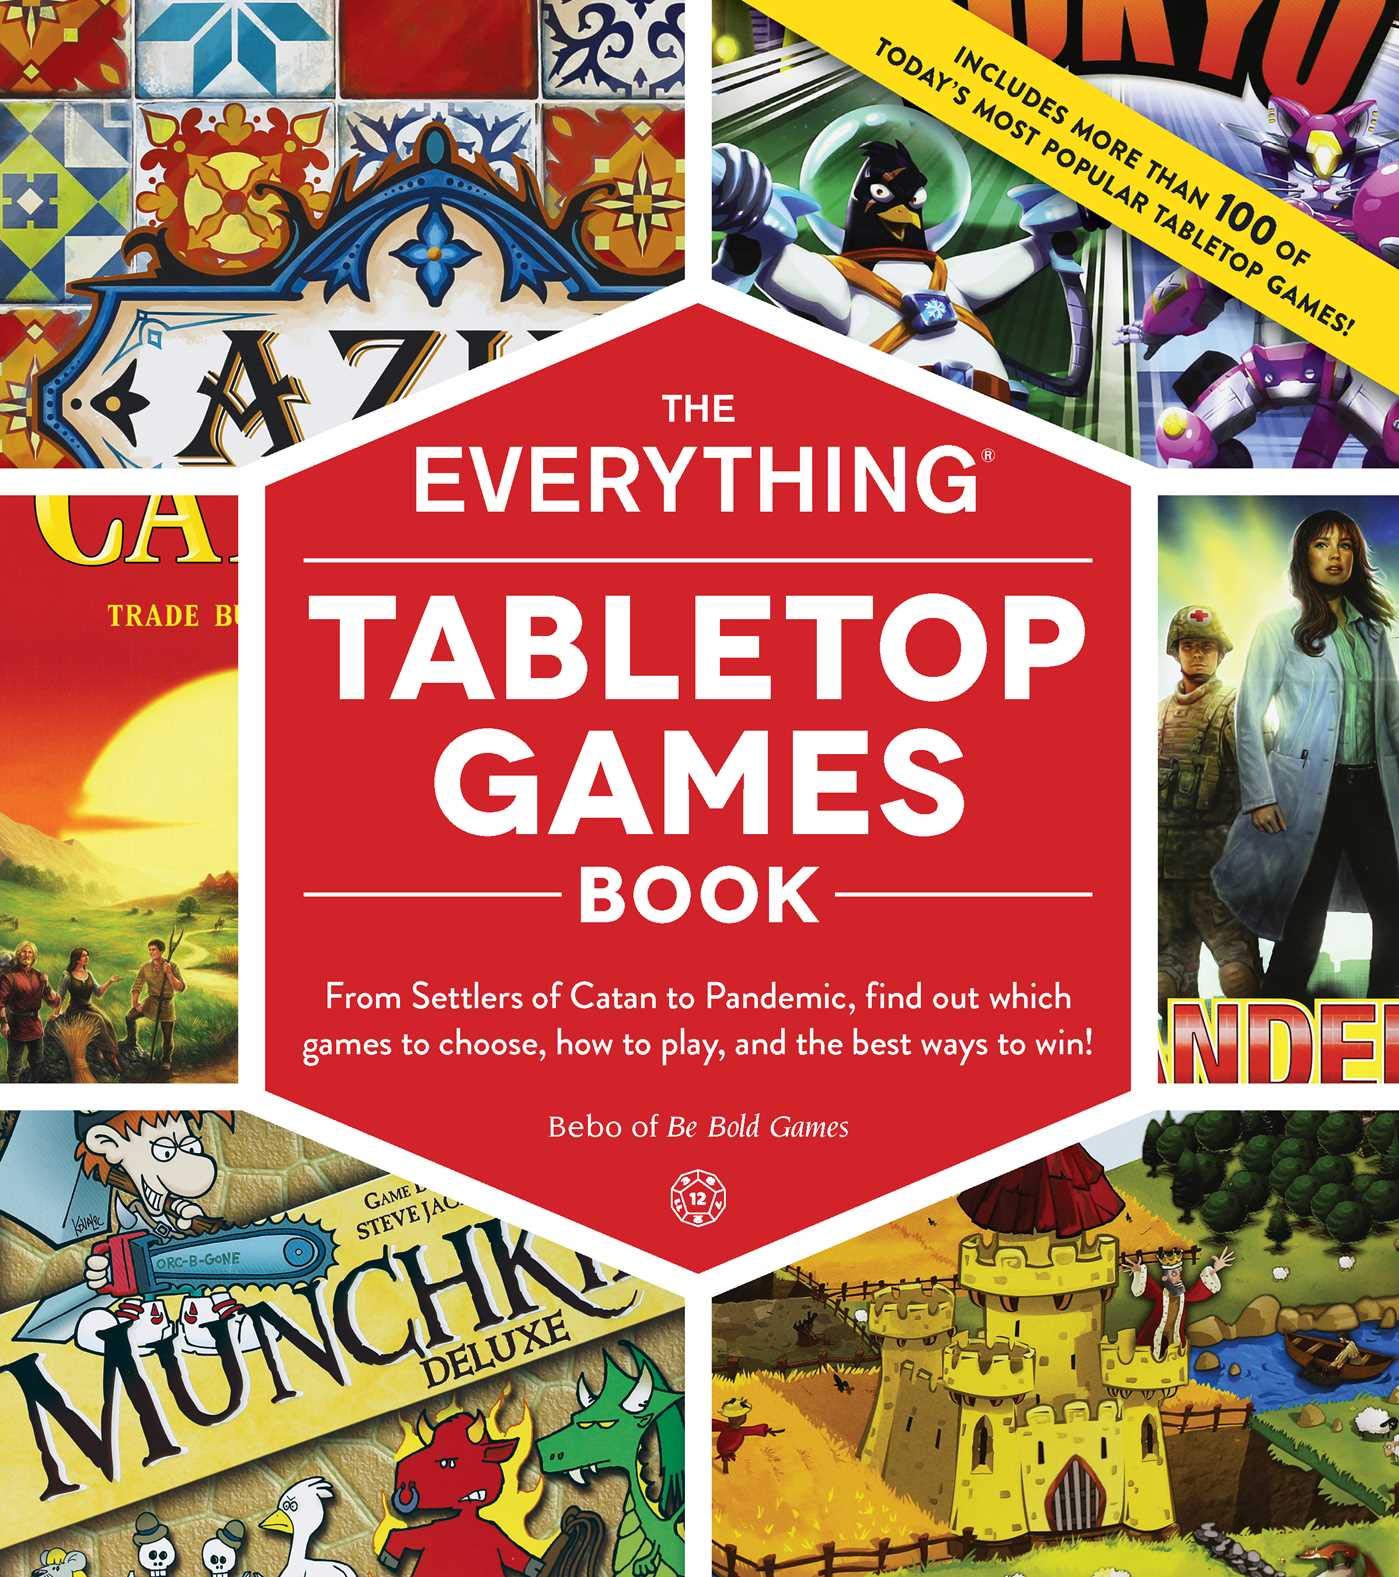 Image for "The Everything Tabletop Games Book"